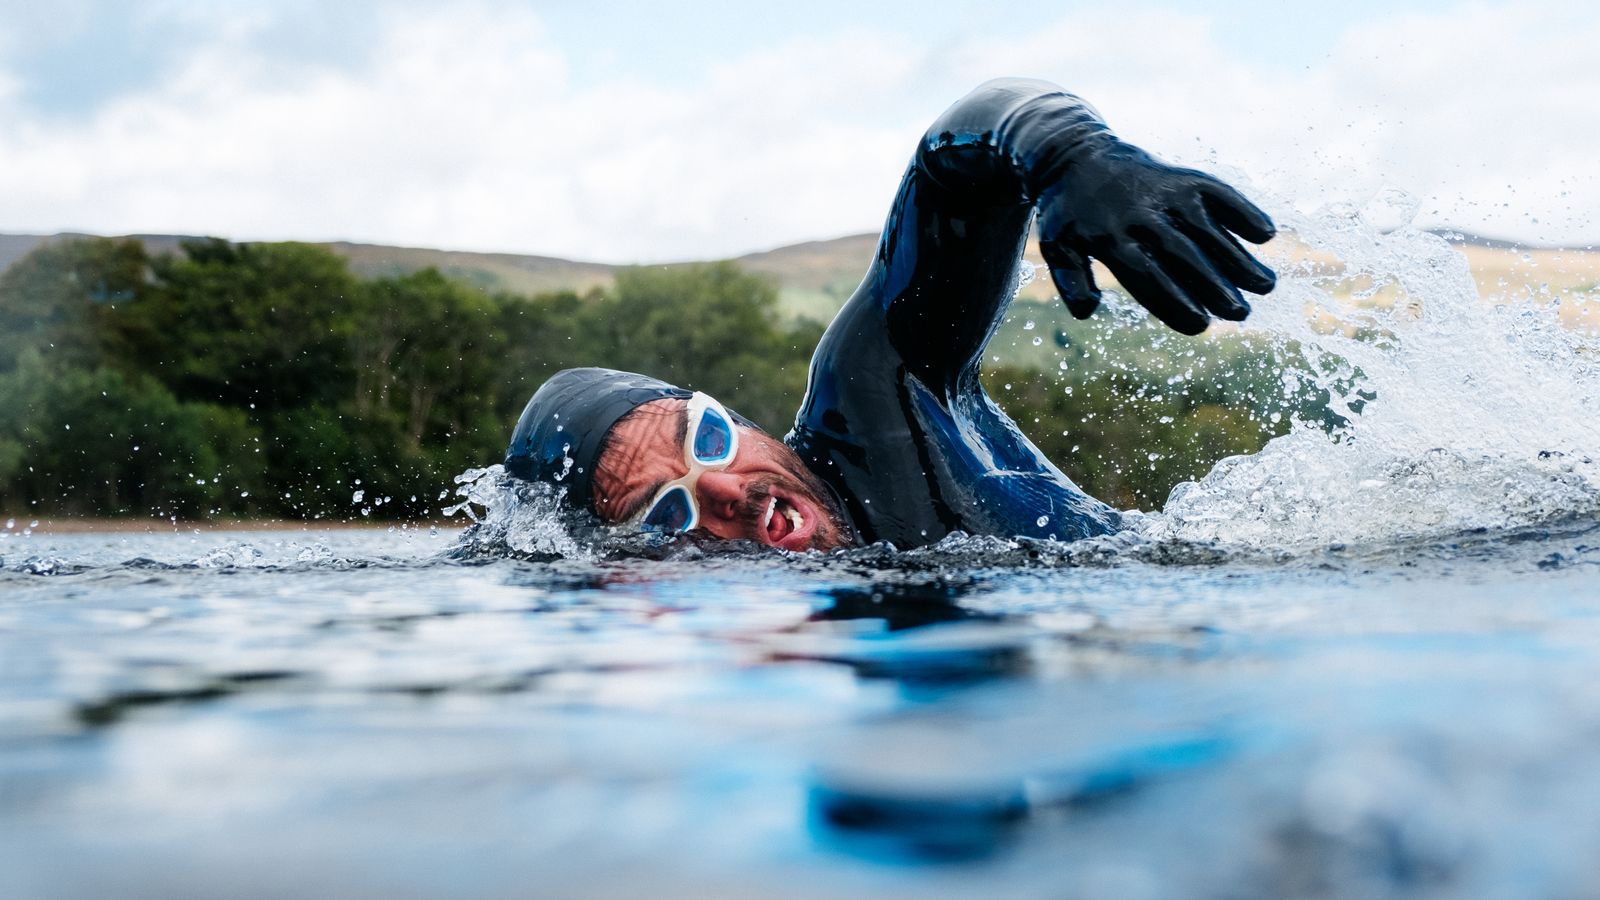 Extreme adventurer swims continuously for more than two days to break Loch Ness record